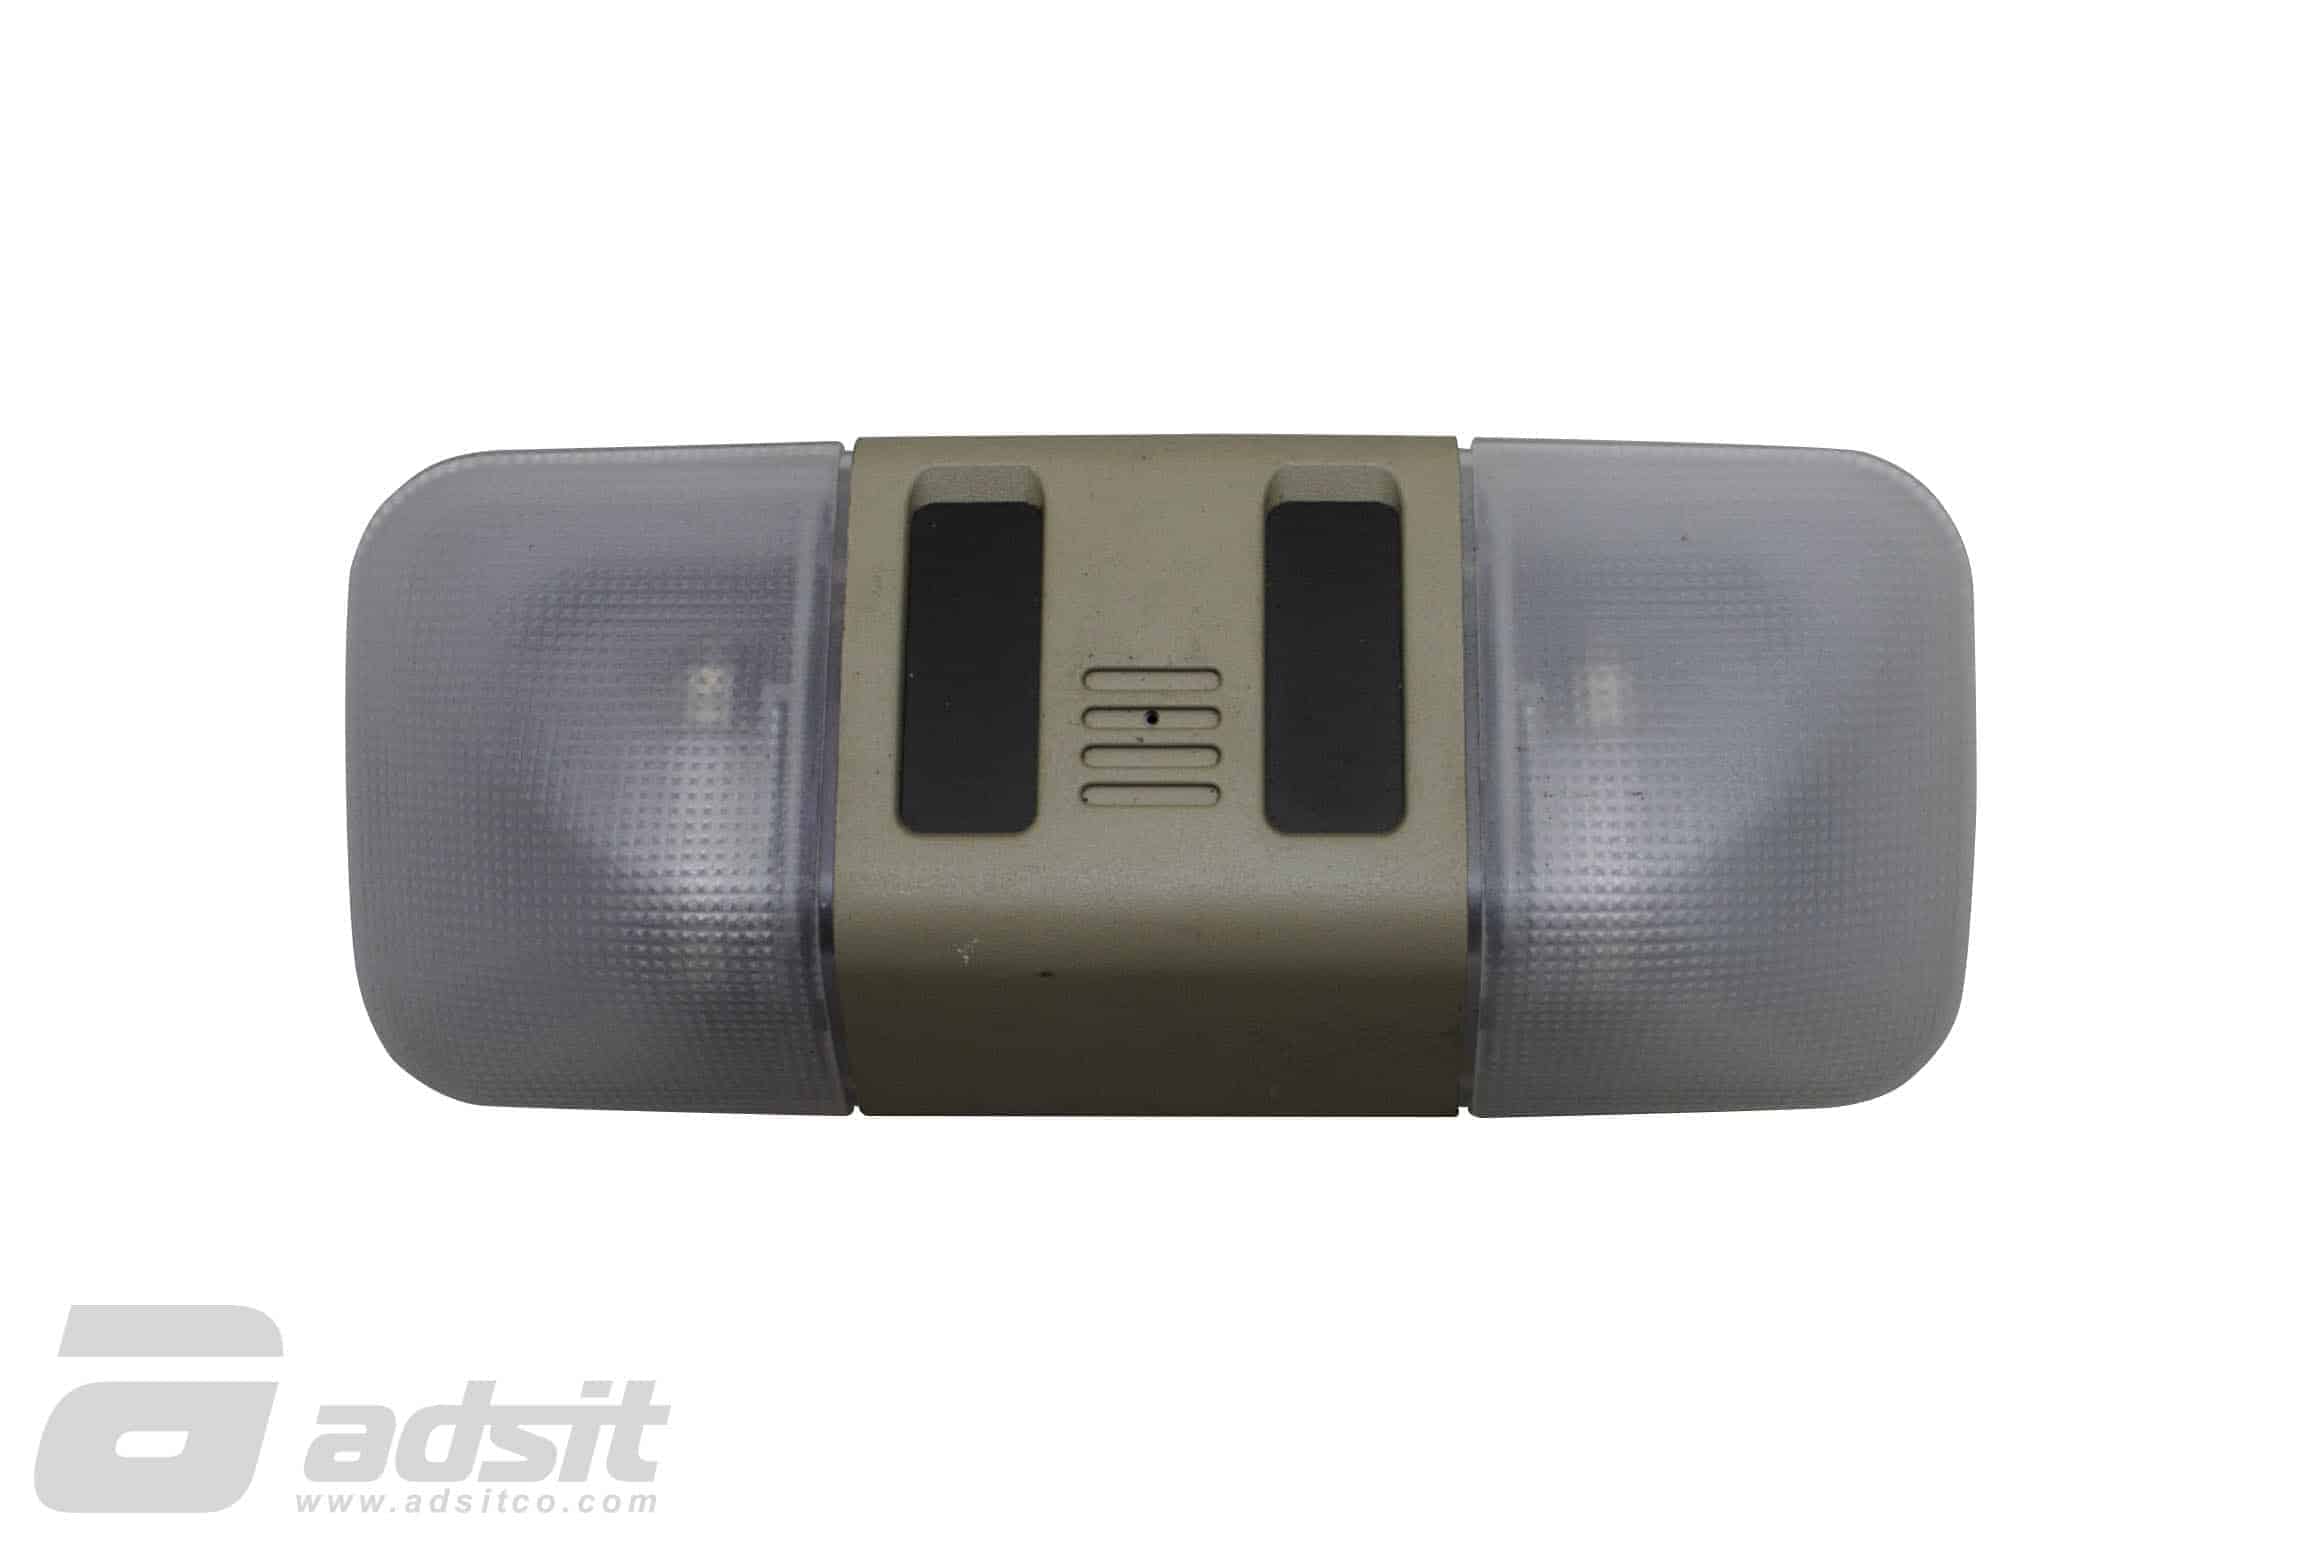 Rear Dome Light W/Parktronic System